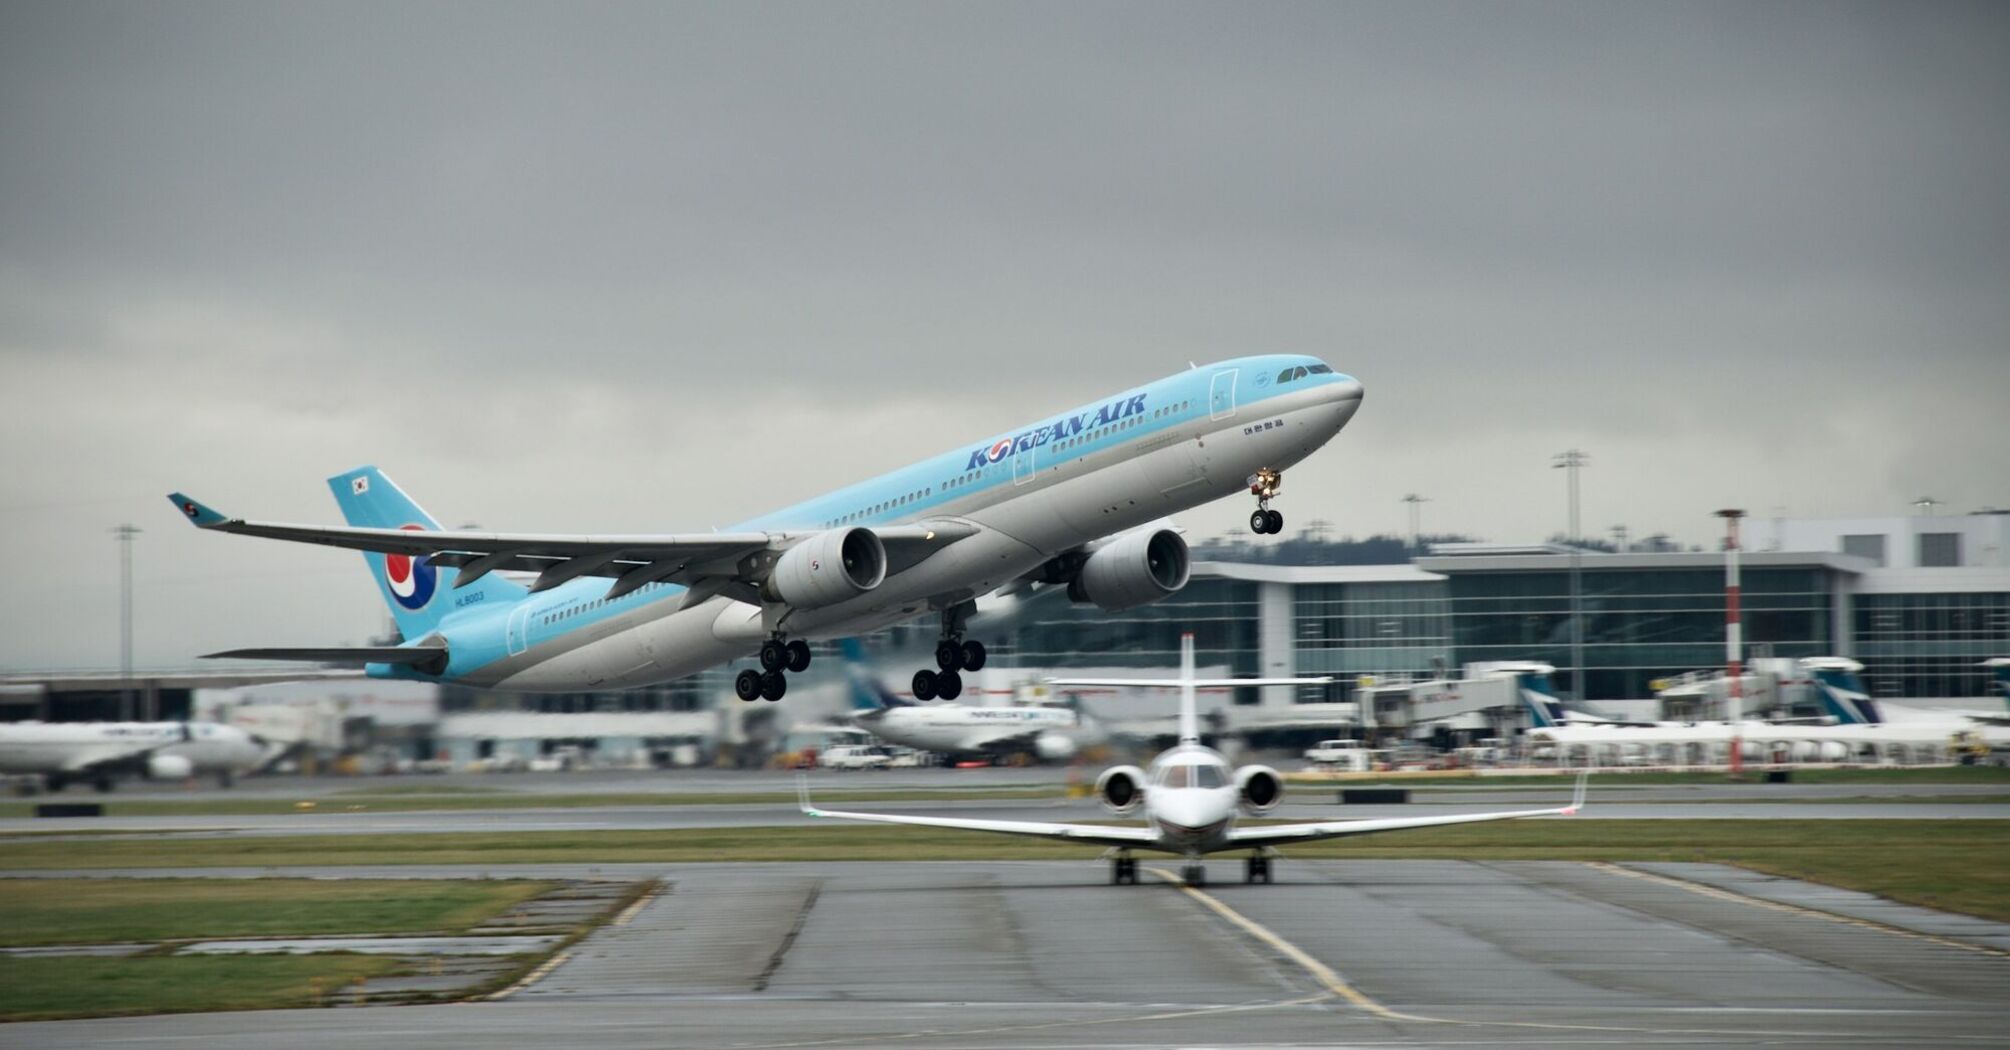 Korean Air aircraft taking off from the runway on a cloudy day